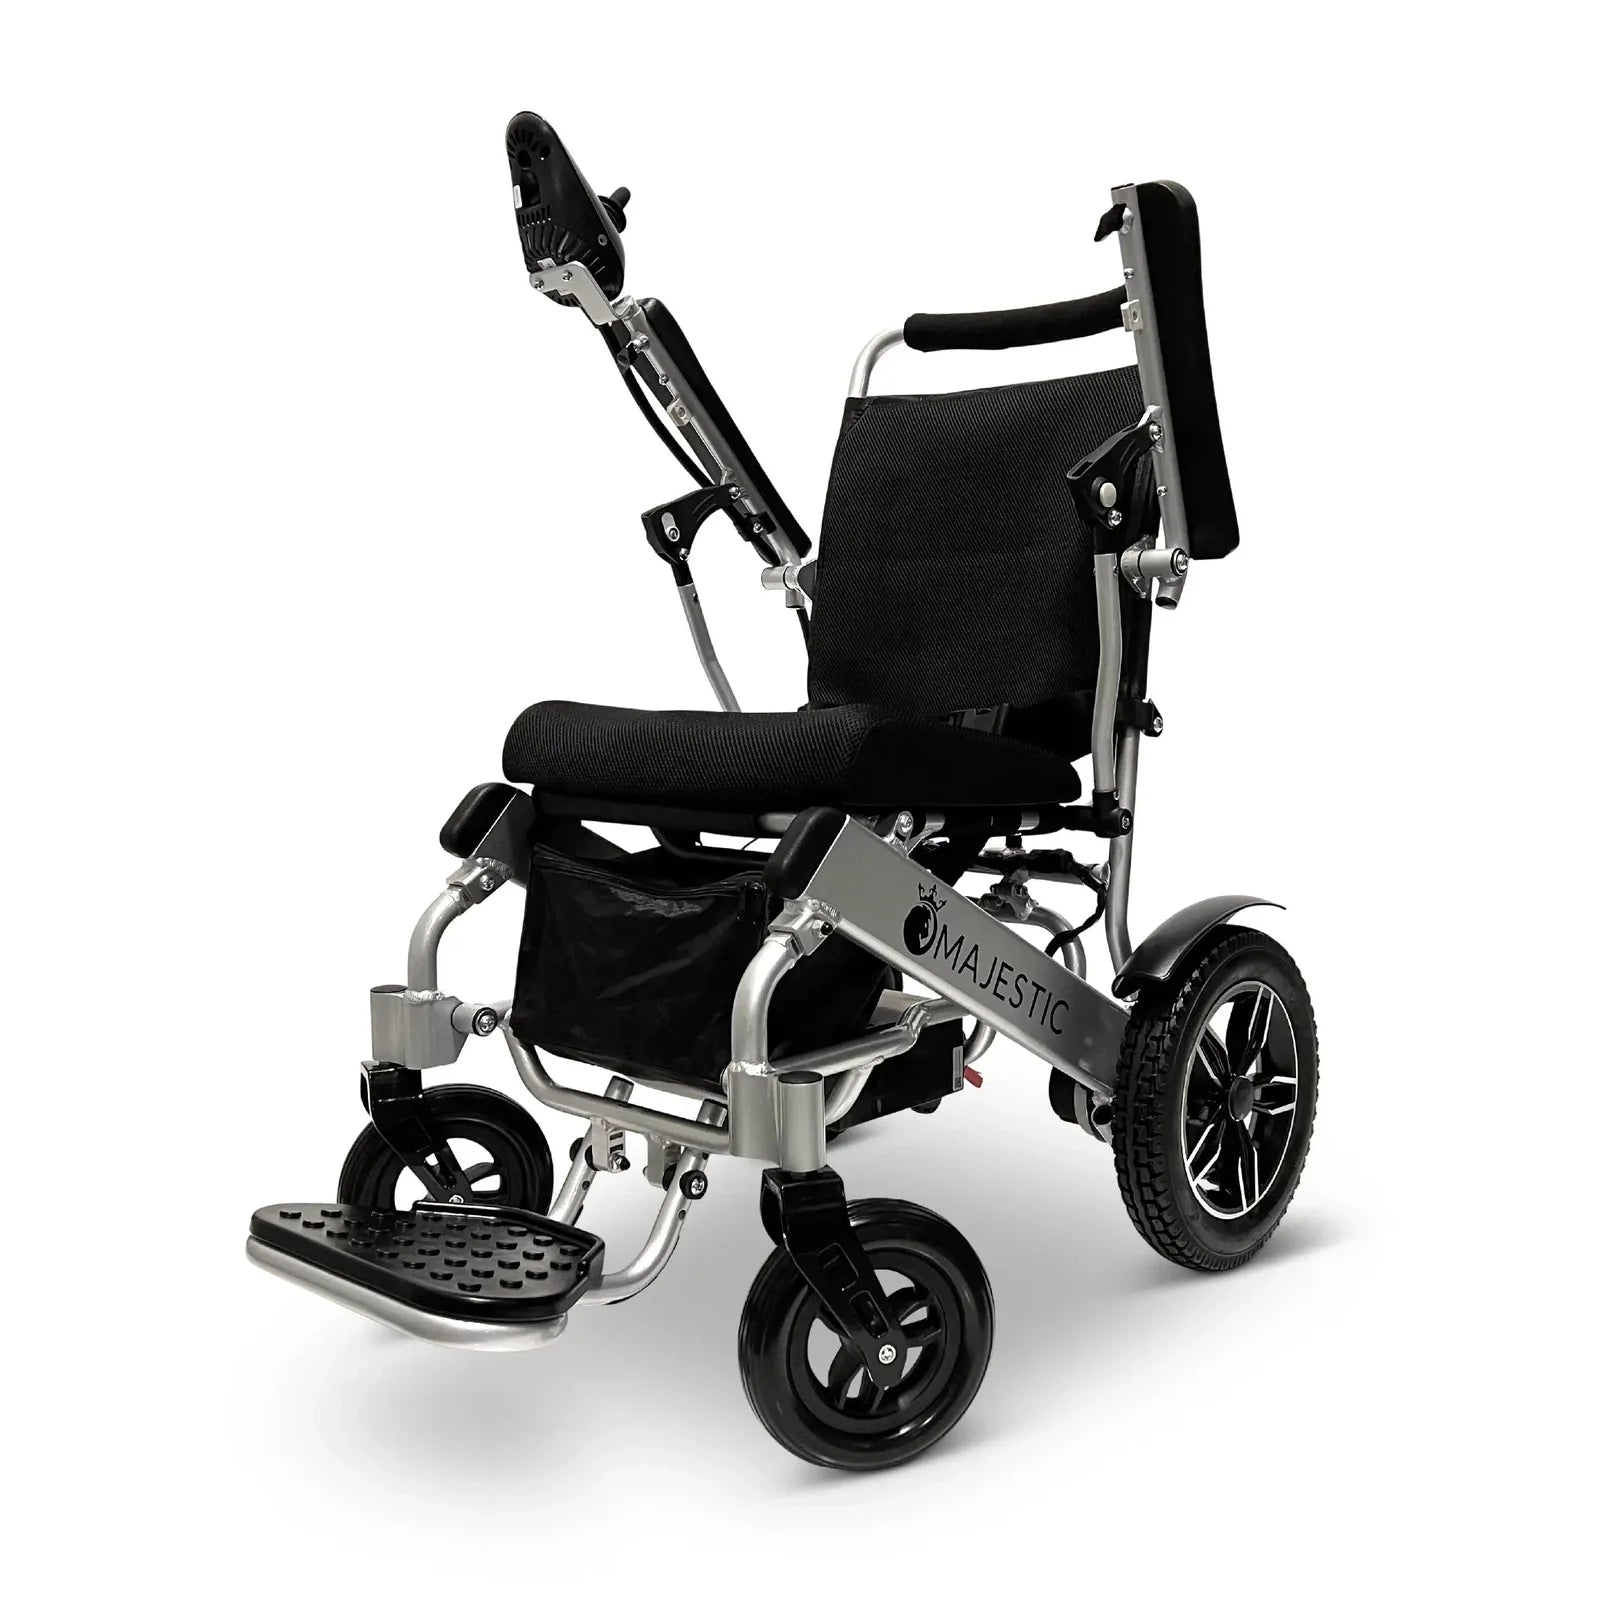 ComfyGO Majestic IQ-8000 Remote Controlled Lightweight Folding Electric Wheelchair Power Wheelchairs ComfyGO Silver Standard 10 Miles & 17.5" Seat Width